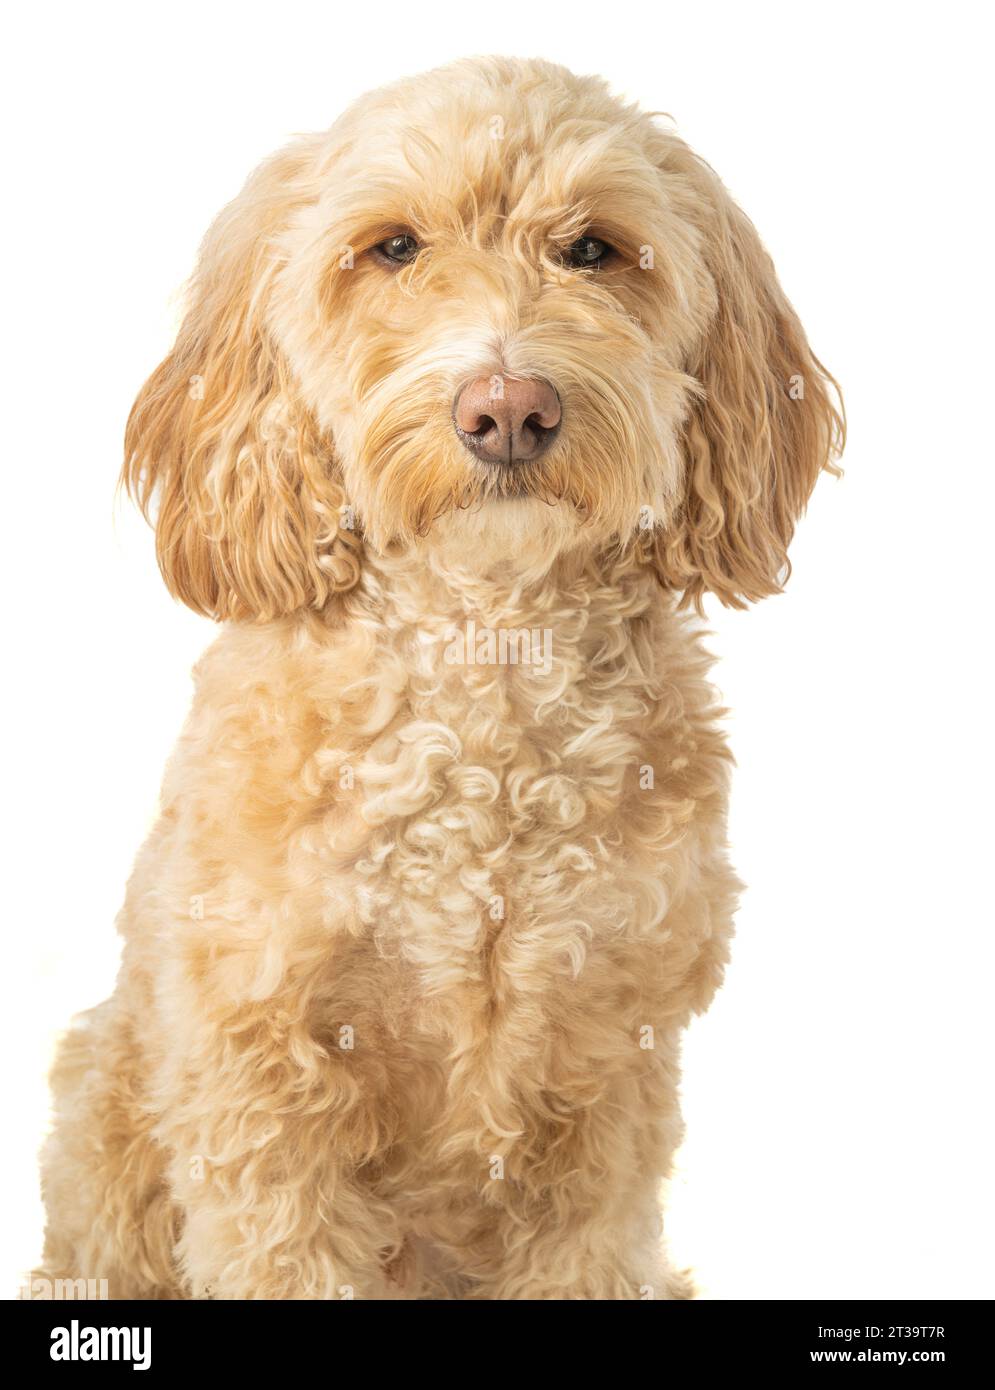 Blonde cockapoo dog sitting attentively, facing the camera on a white background. Stock Photo